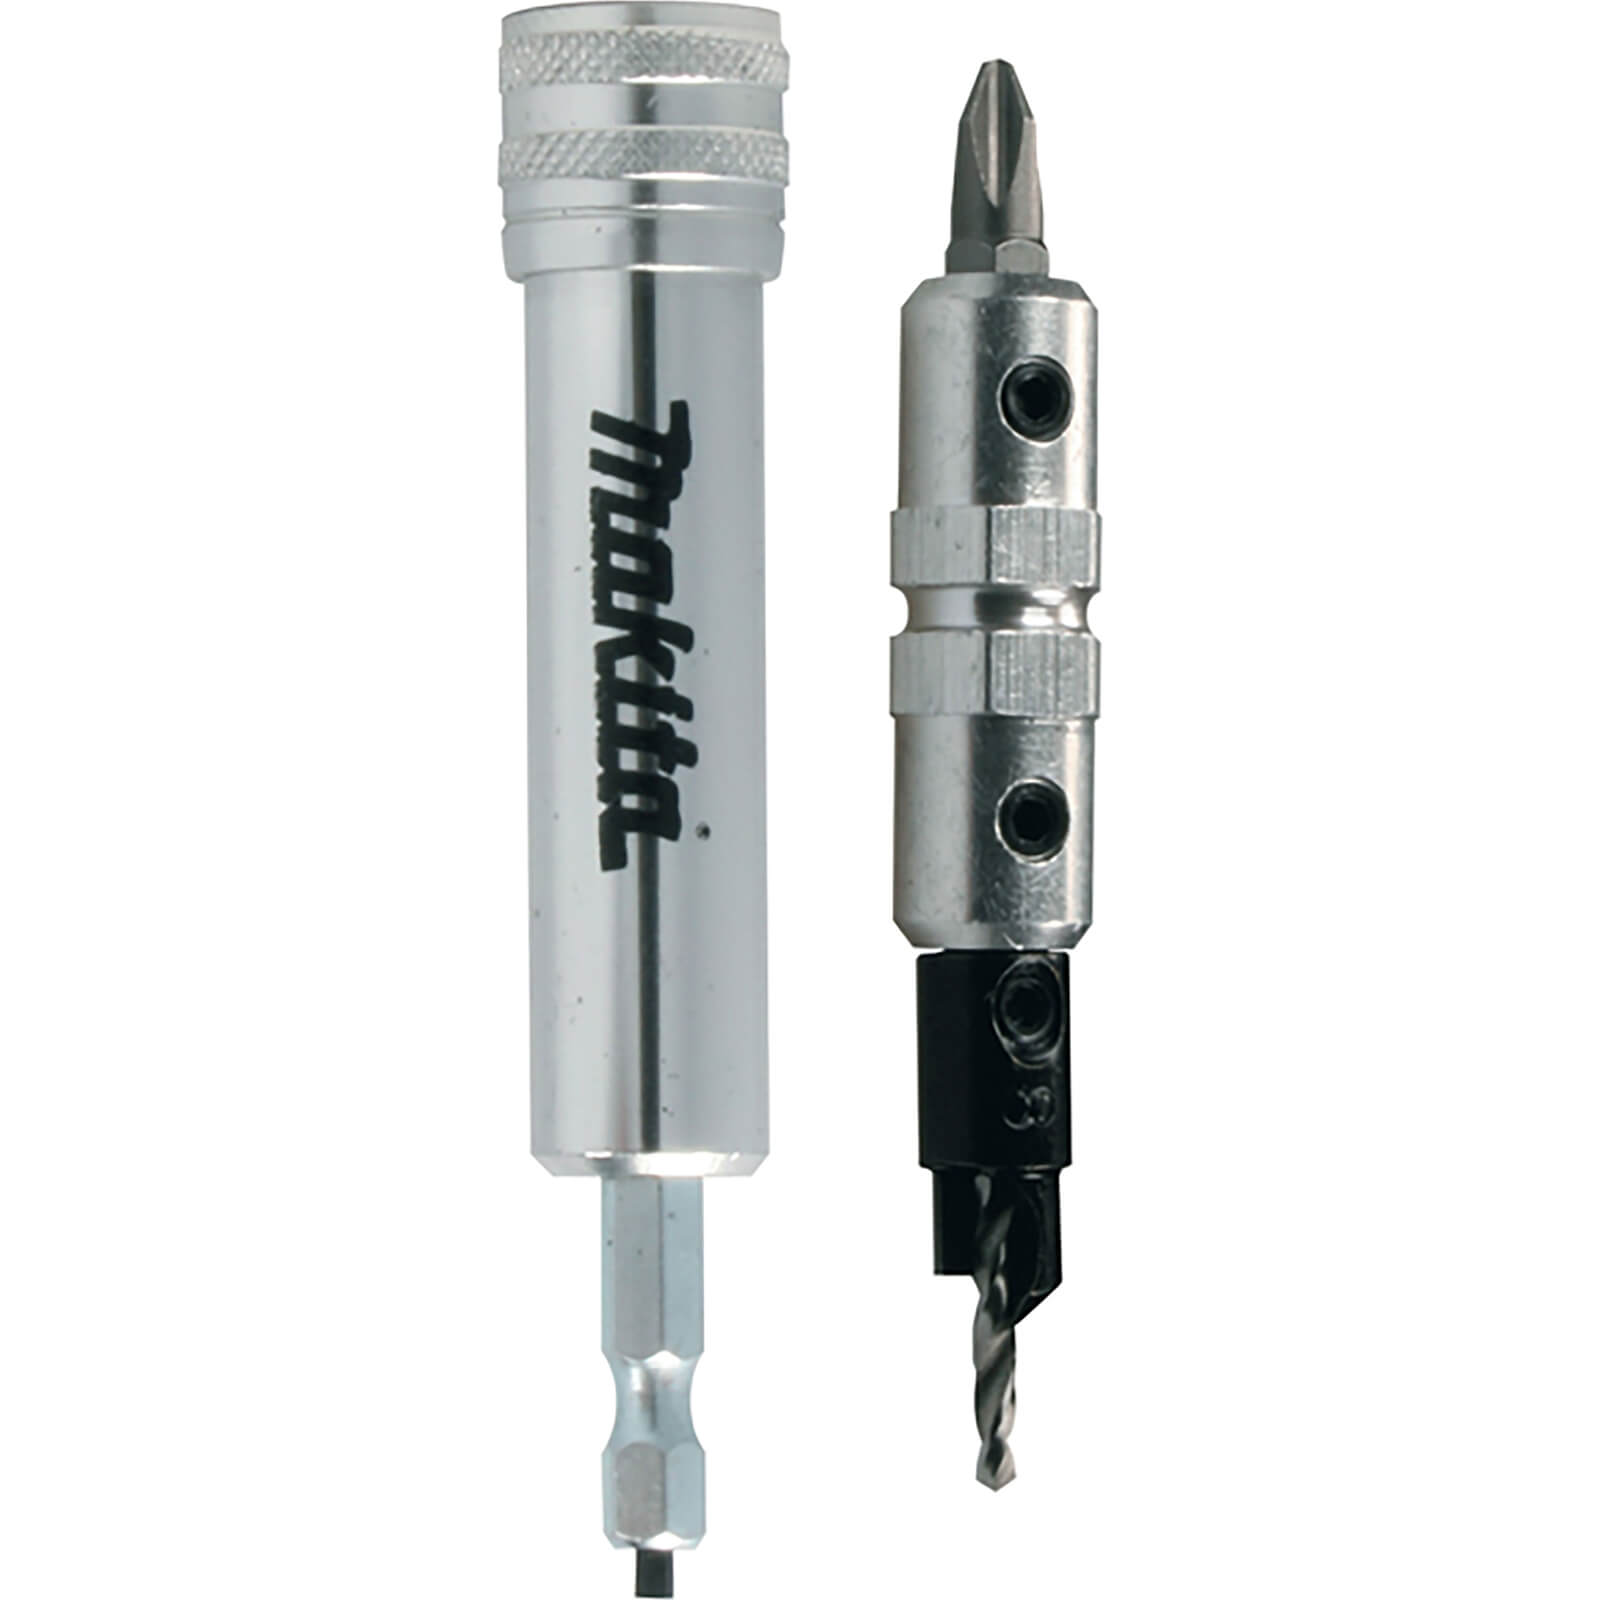 Image of Makita Professional 4 Way Drill and Screwdriver Bit Size 6